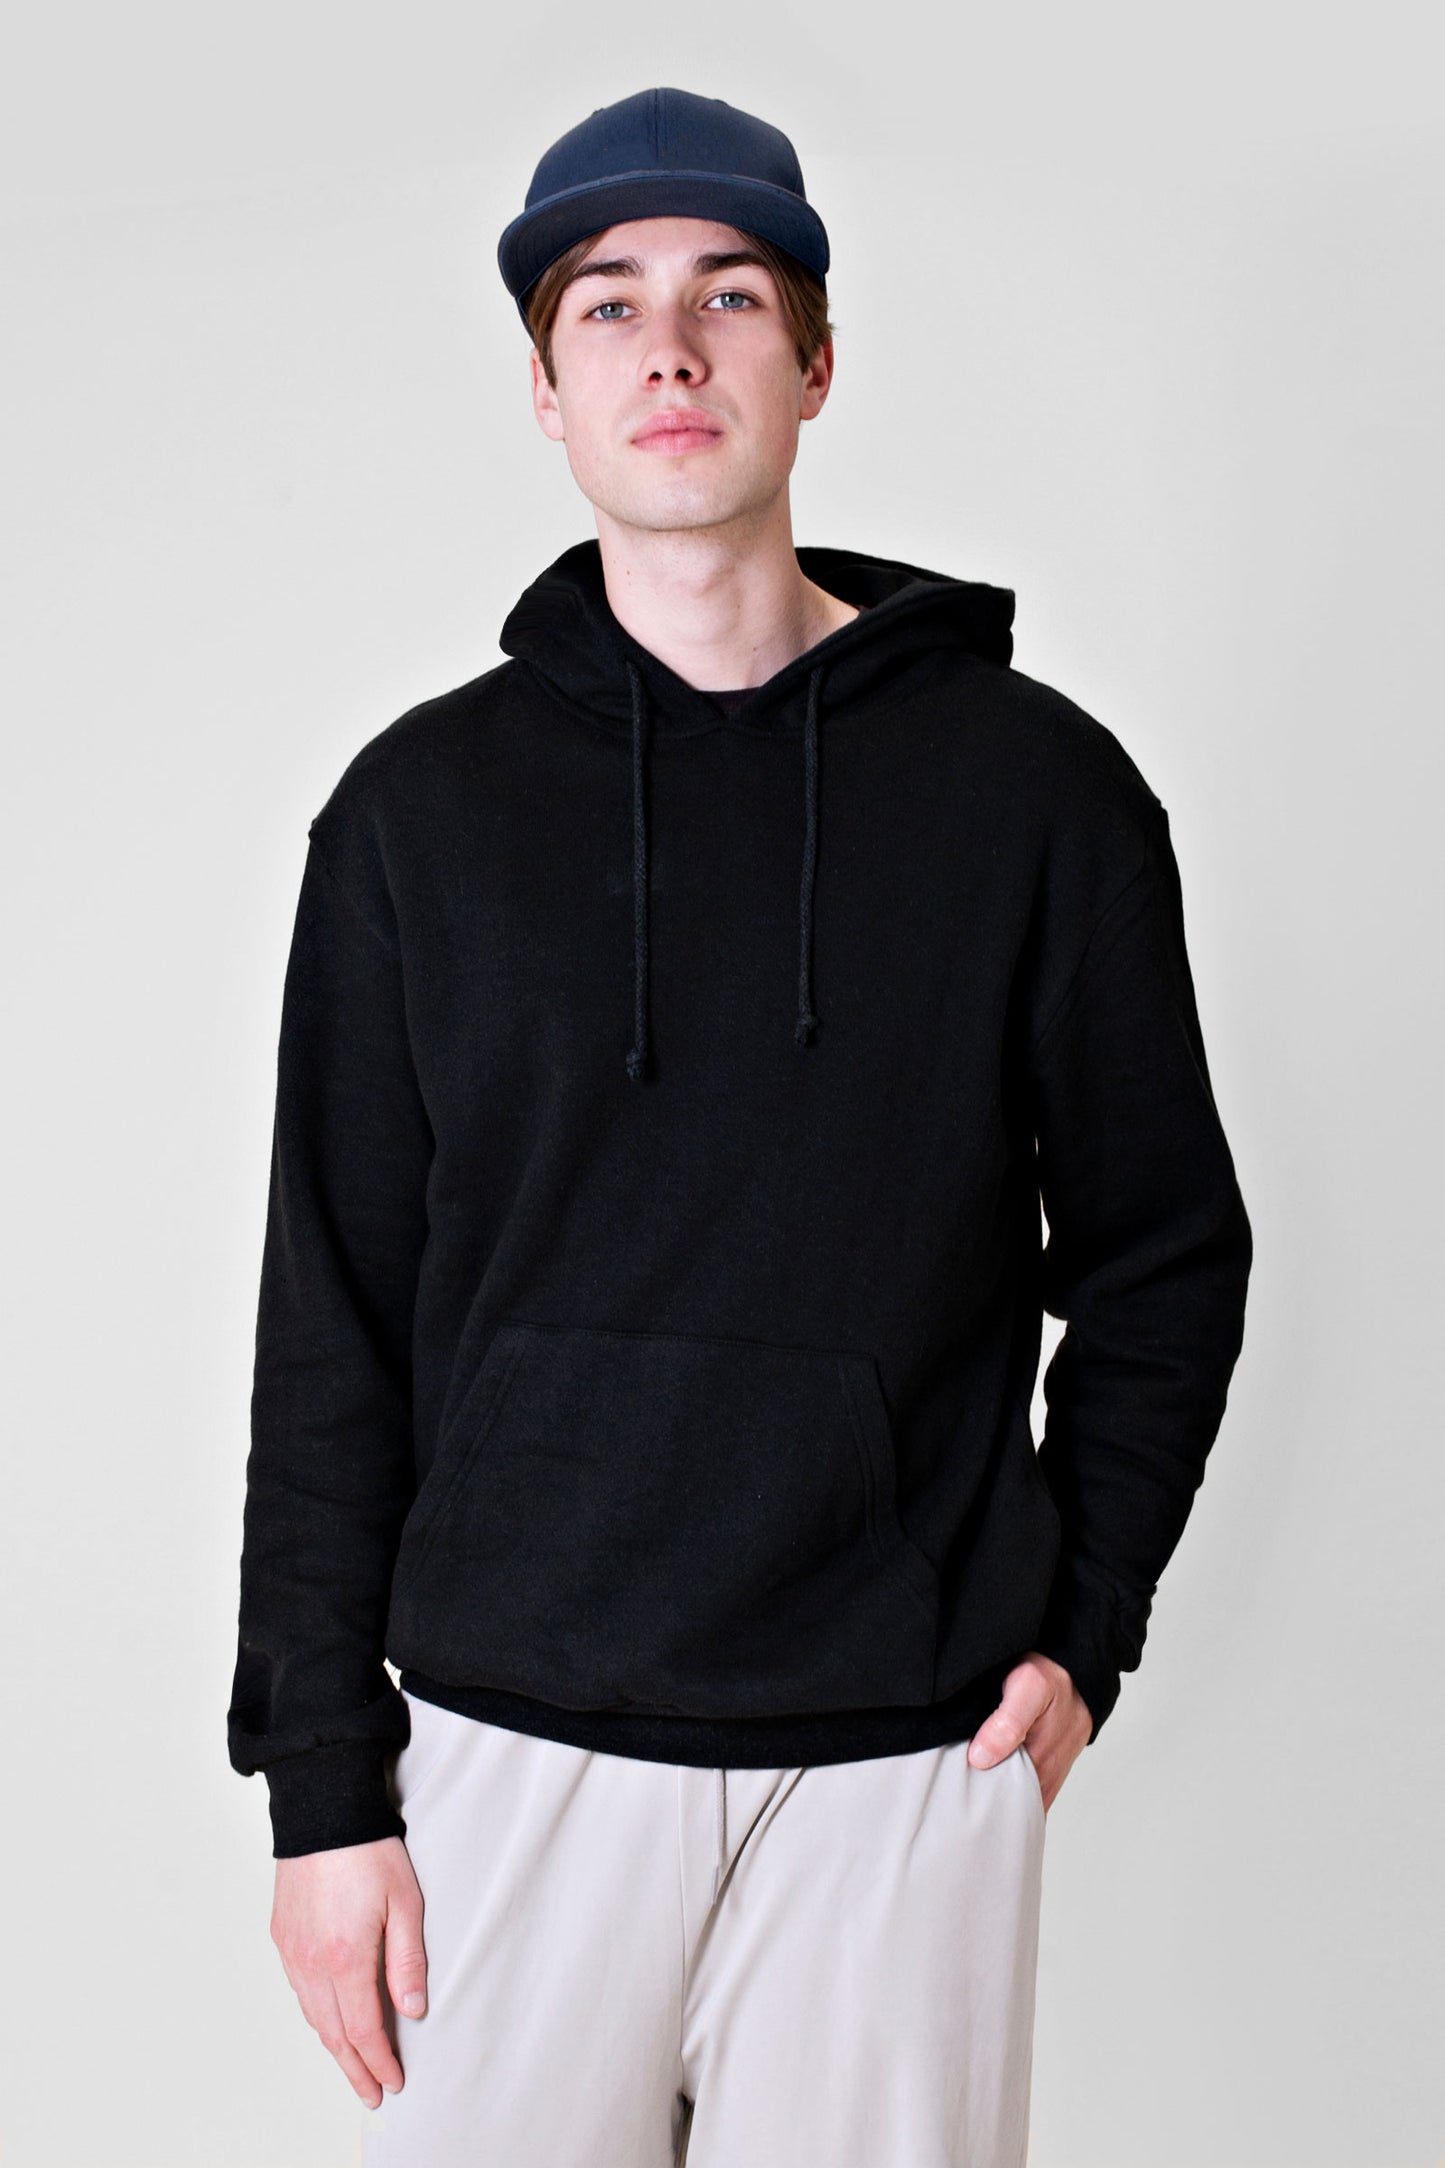 Experience the ultimate comfort of this soft combed hemp and organic cotton fleece hooded sweatshirt in black.